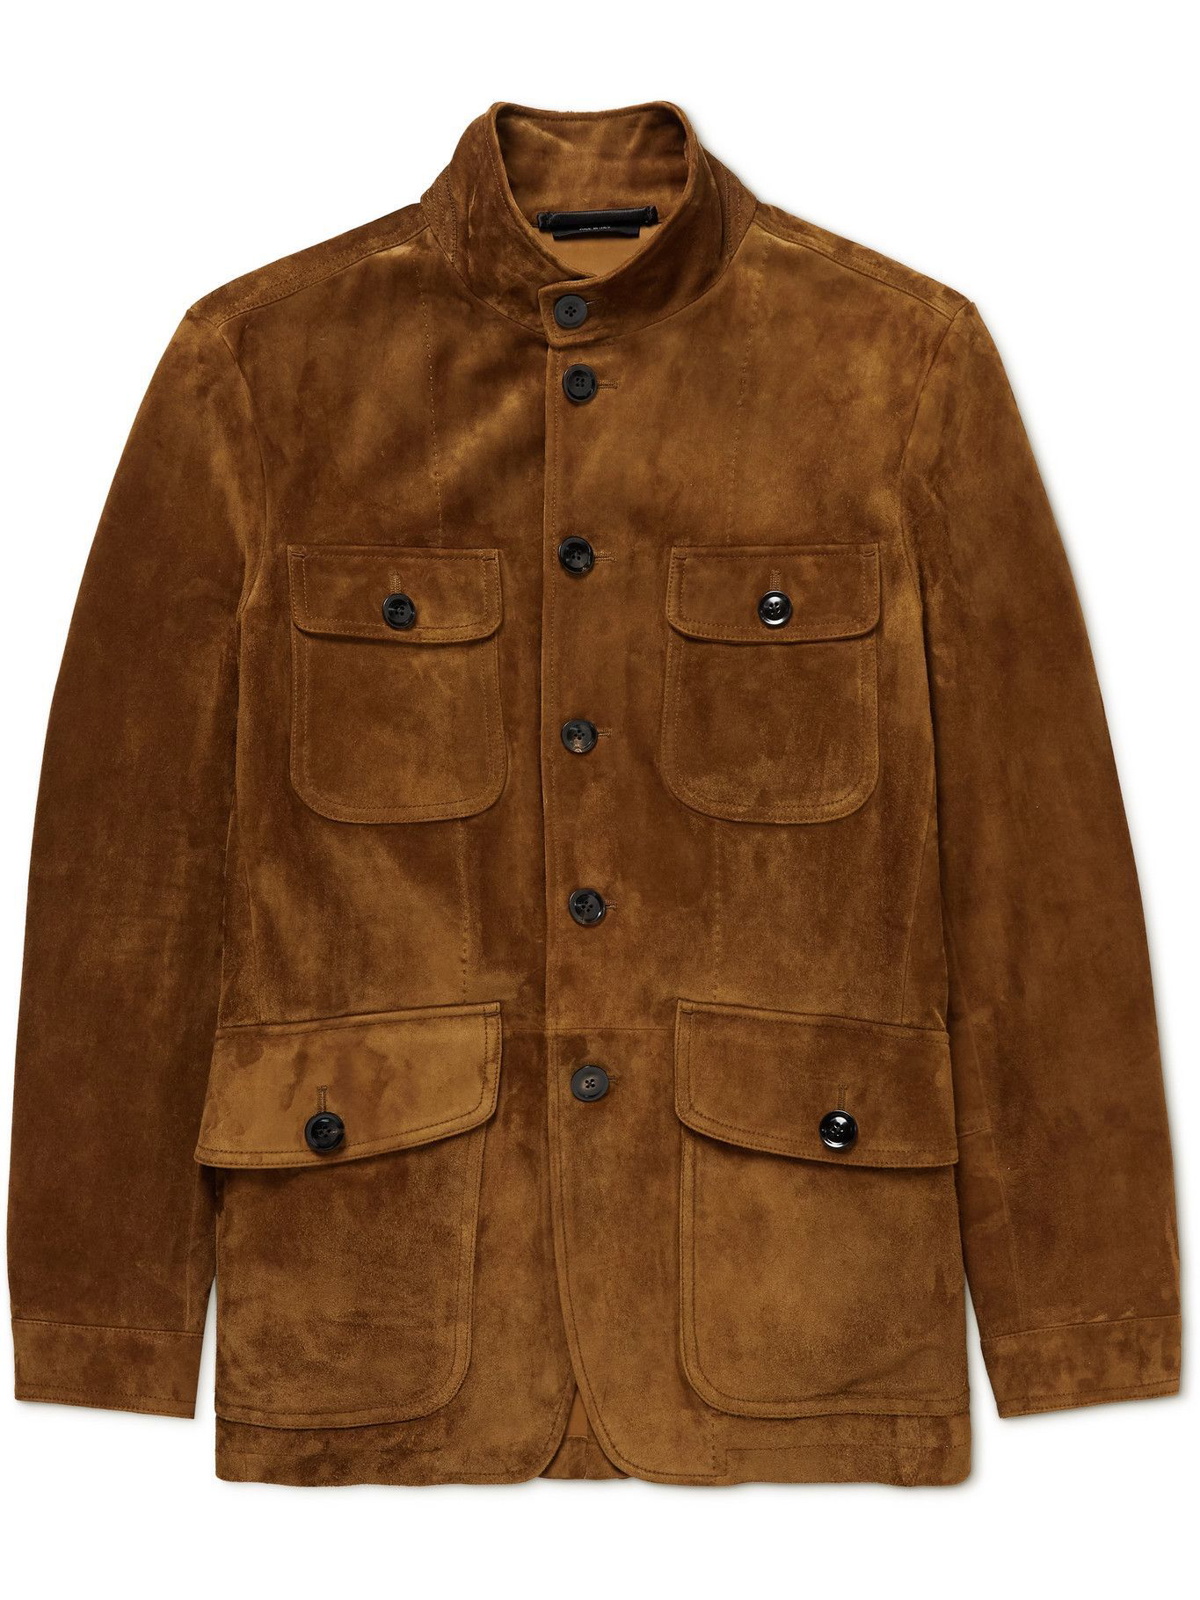 TOM FORD - Suede Field - Brown TOM FORD